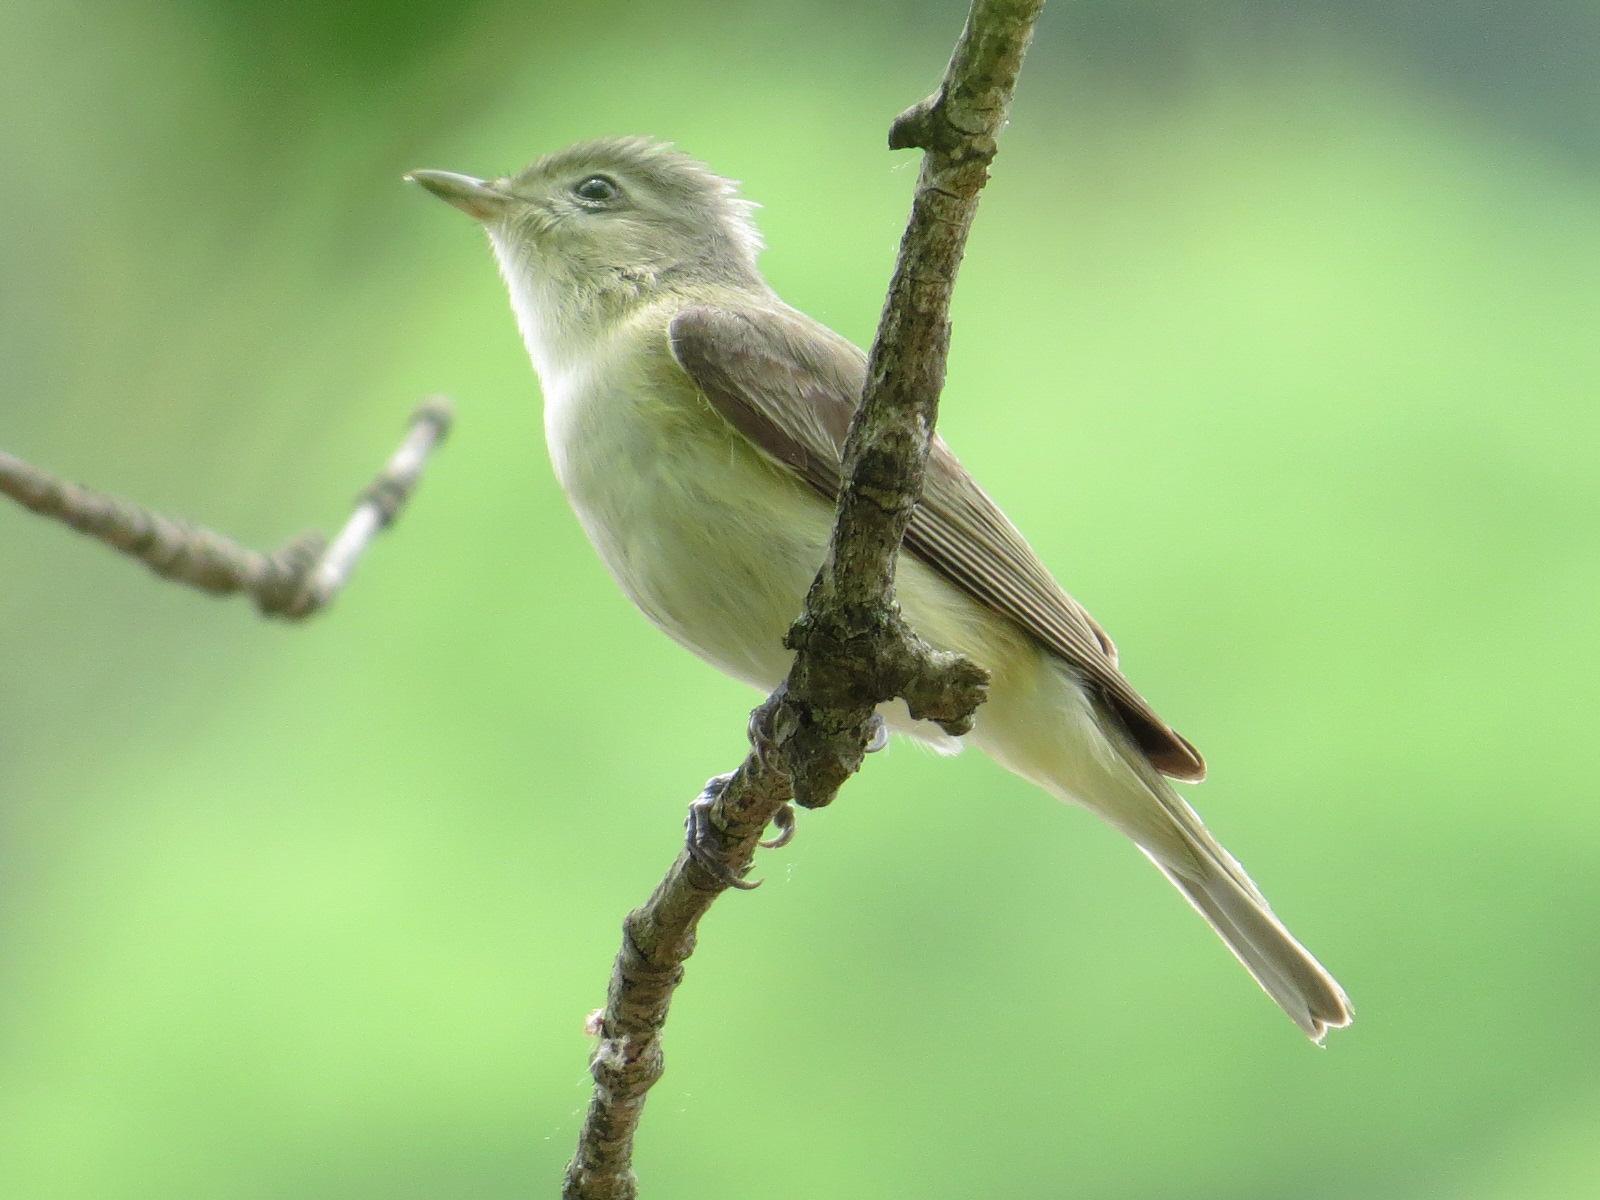 Warbling Vireo Photo by Kathy Wooding